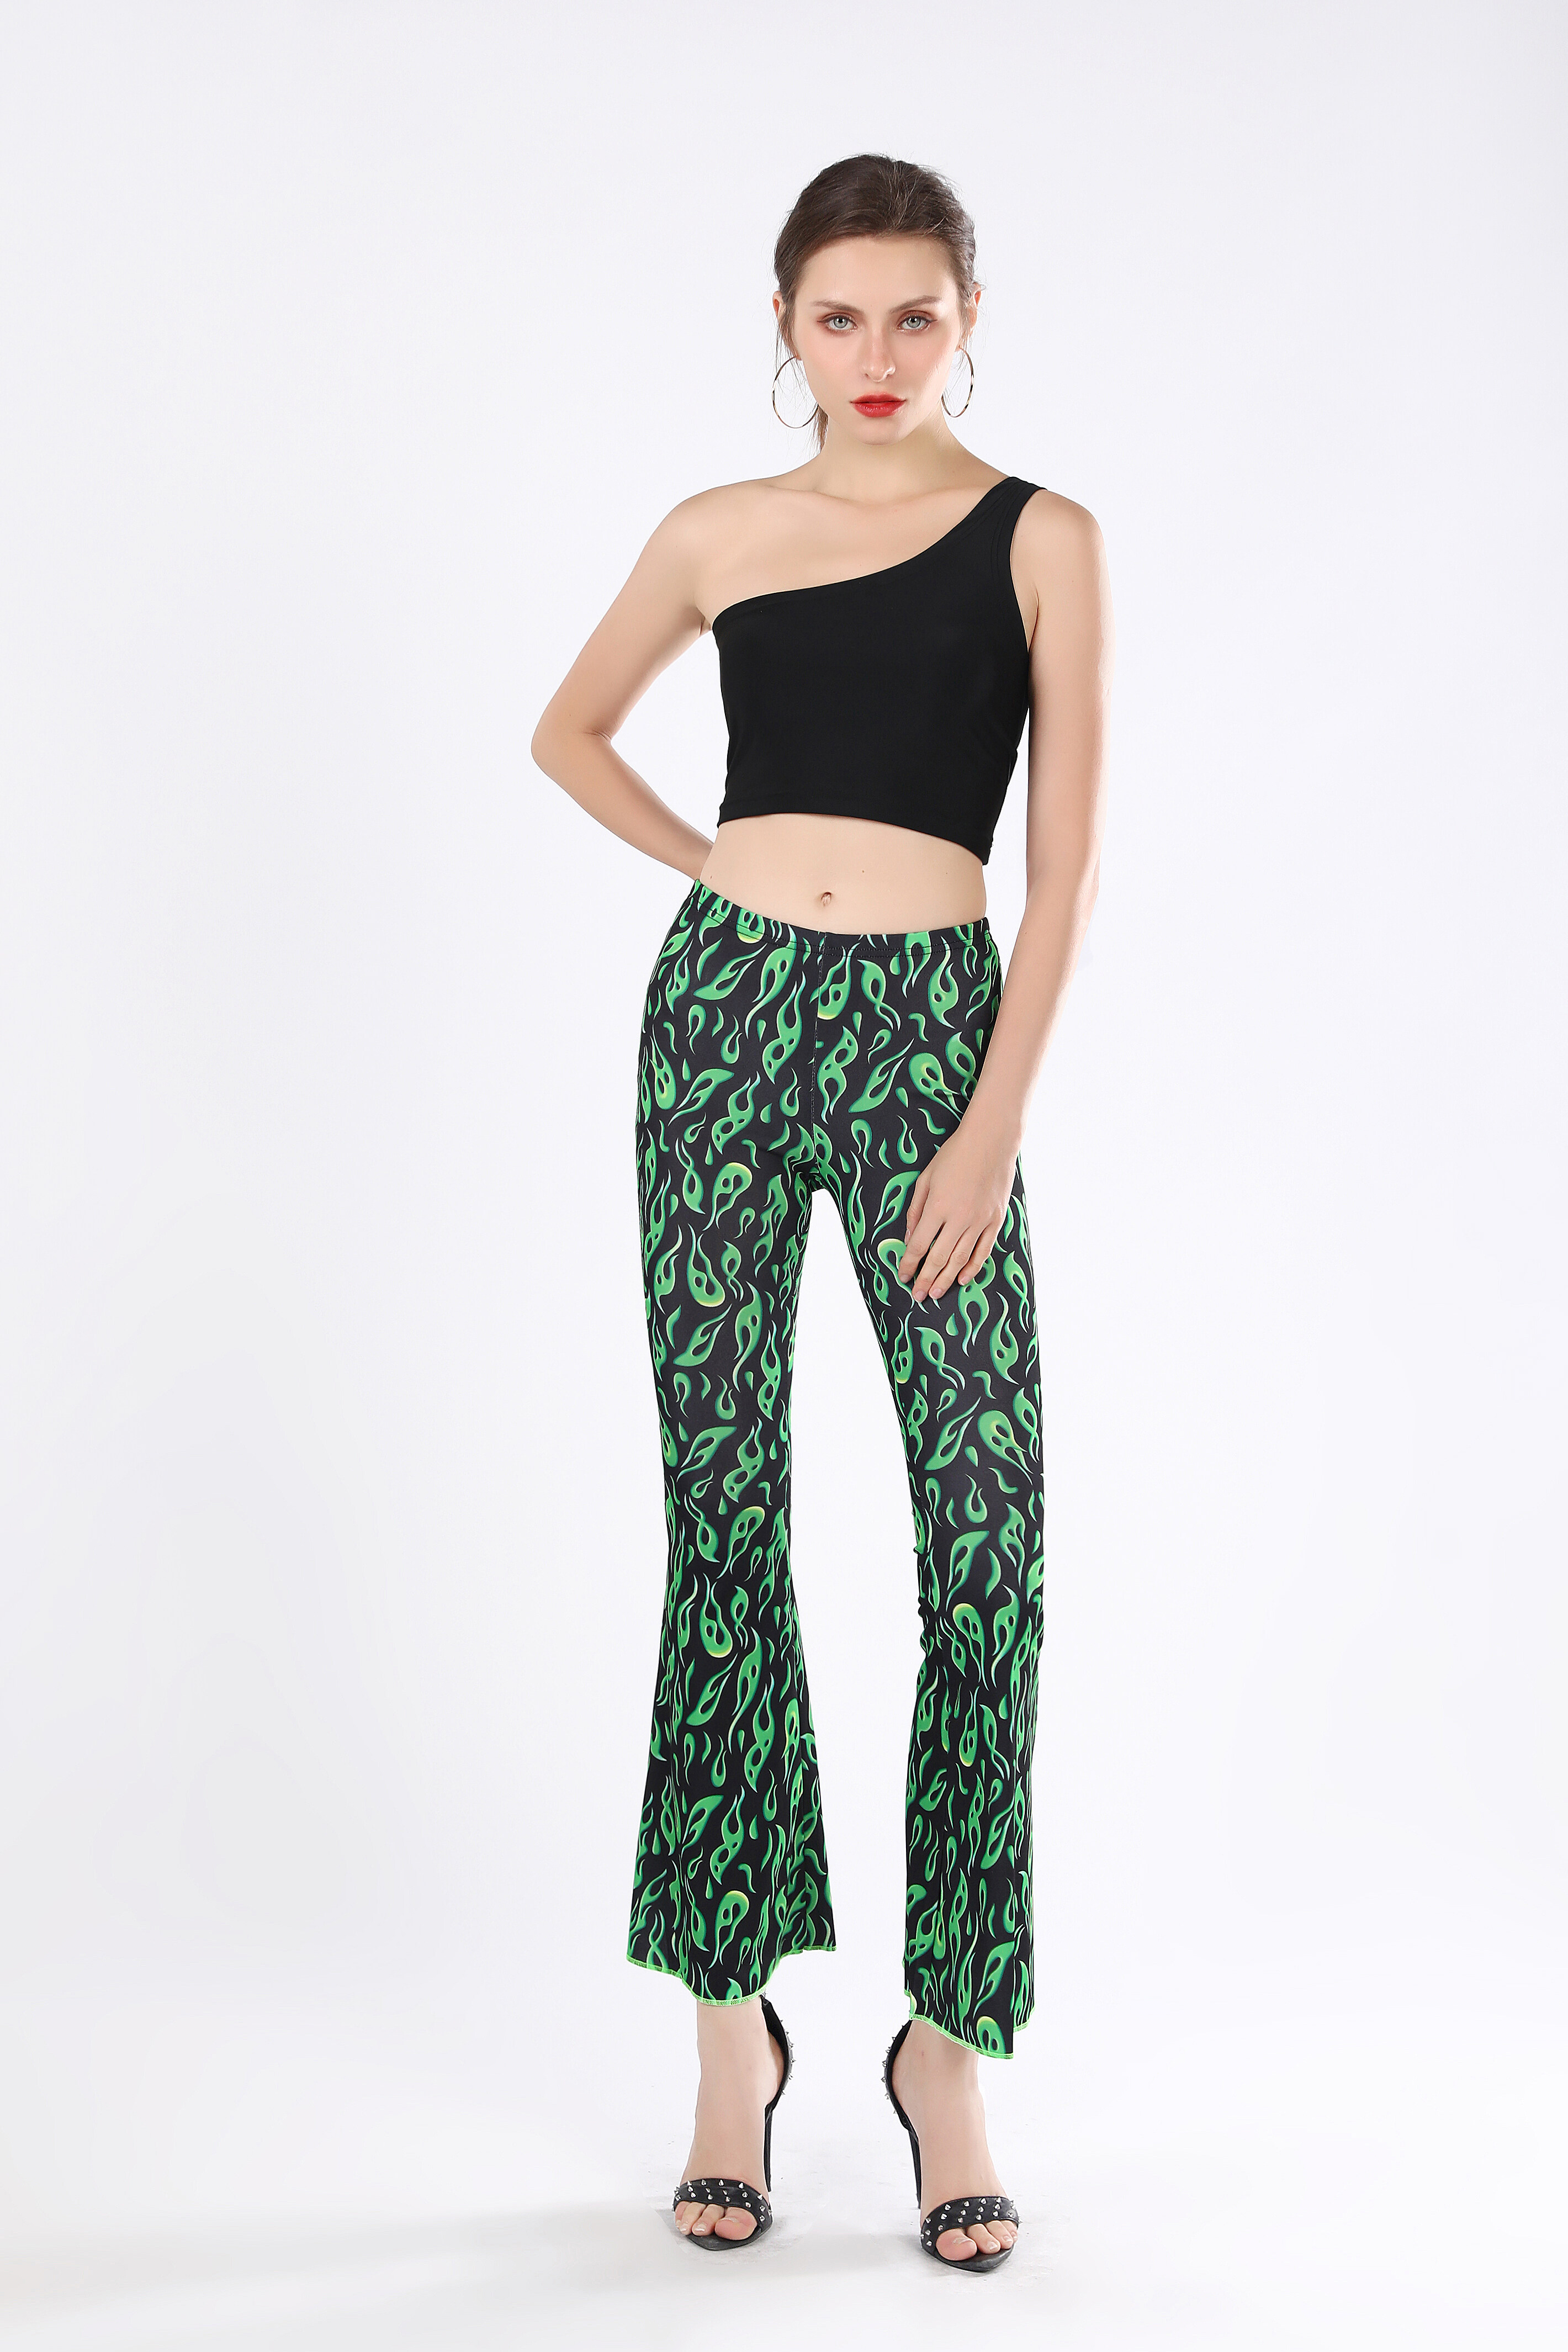 Ladies Patterned Summer Trousers